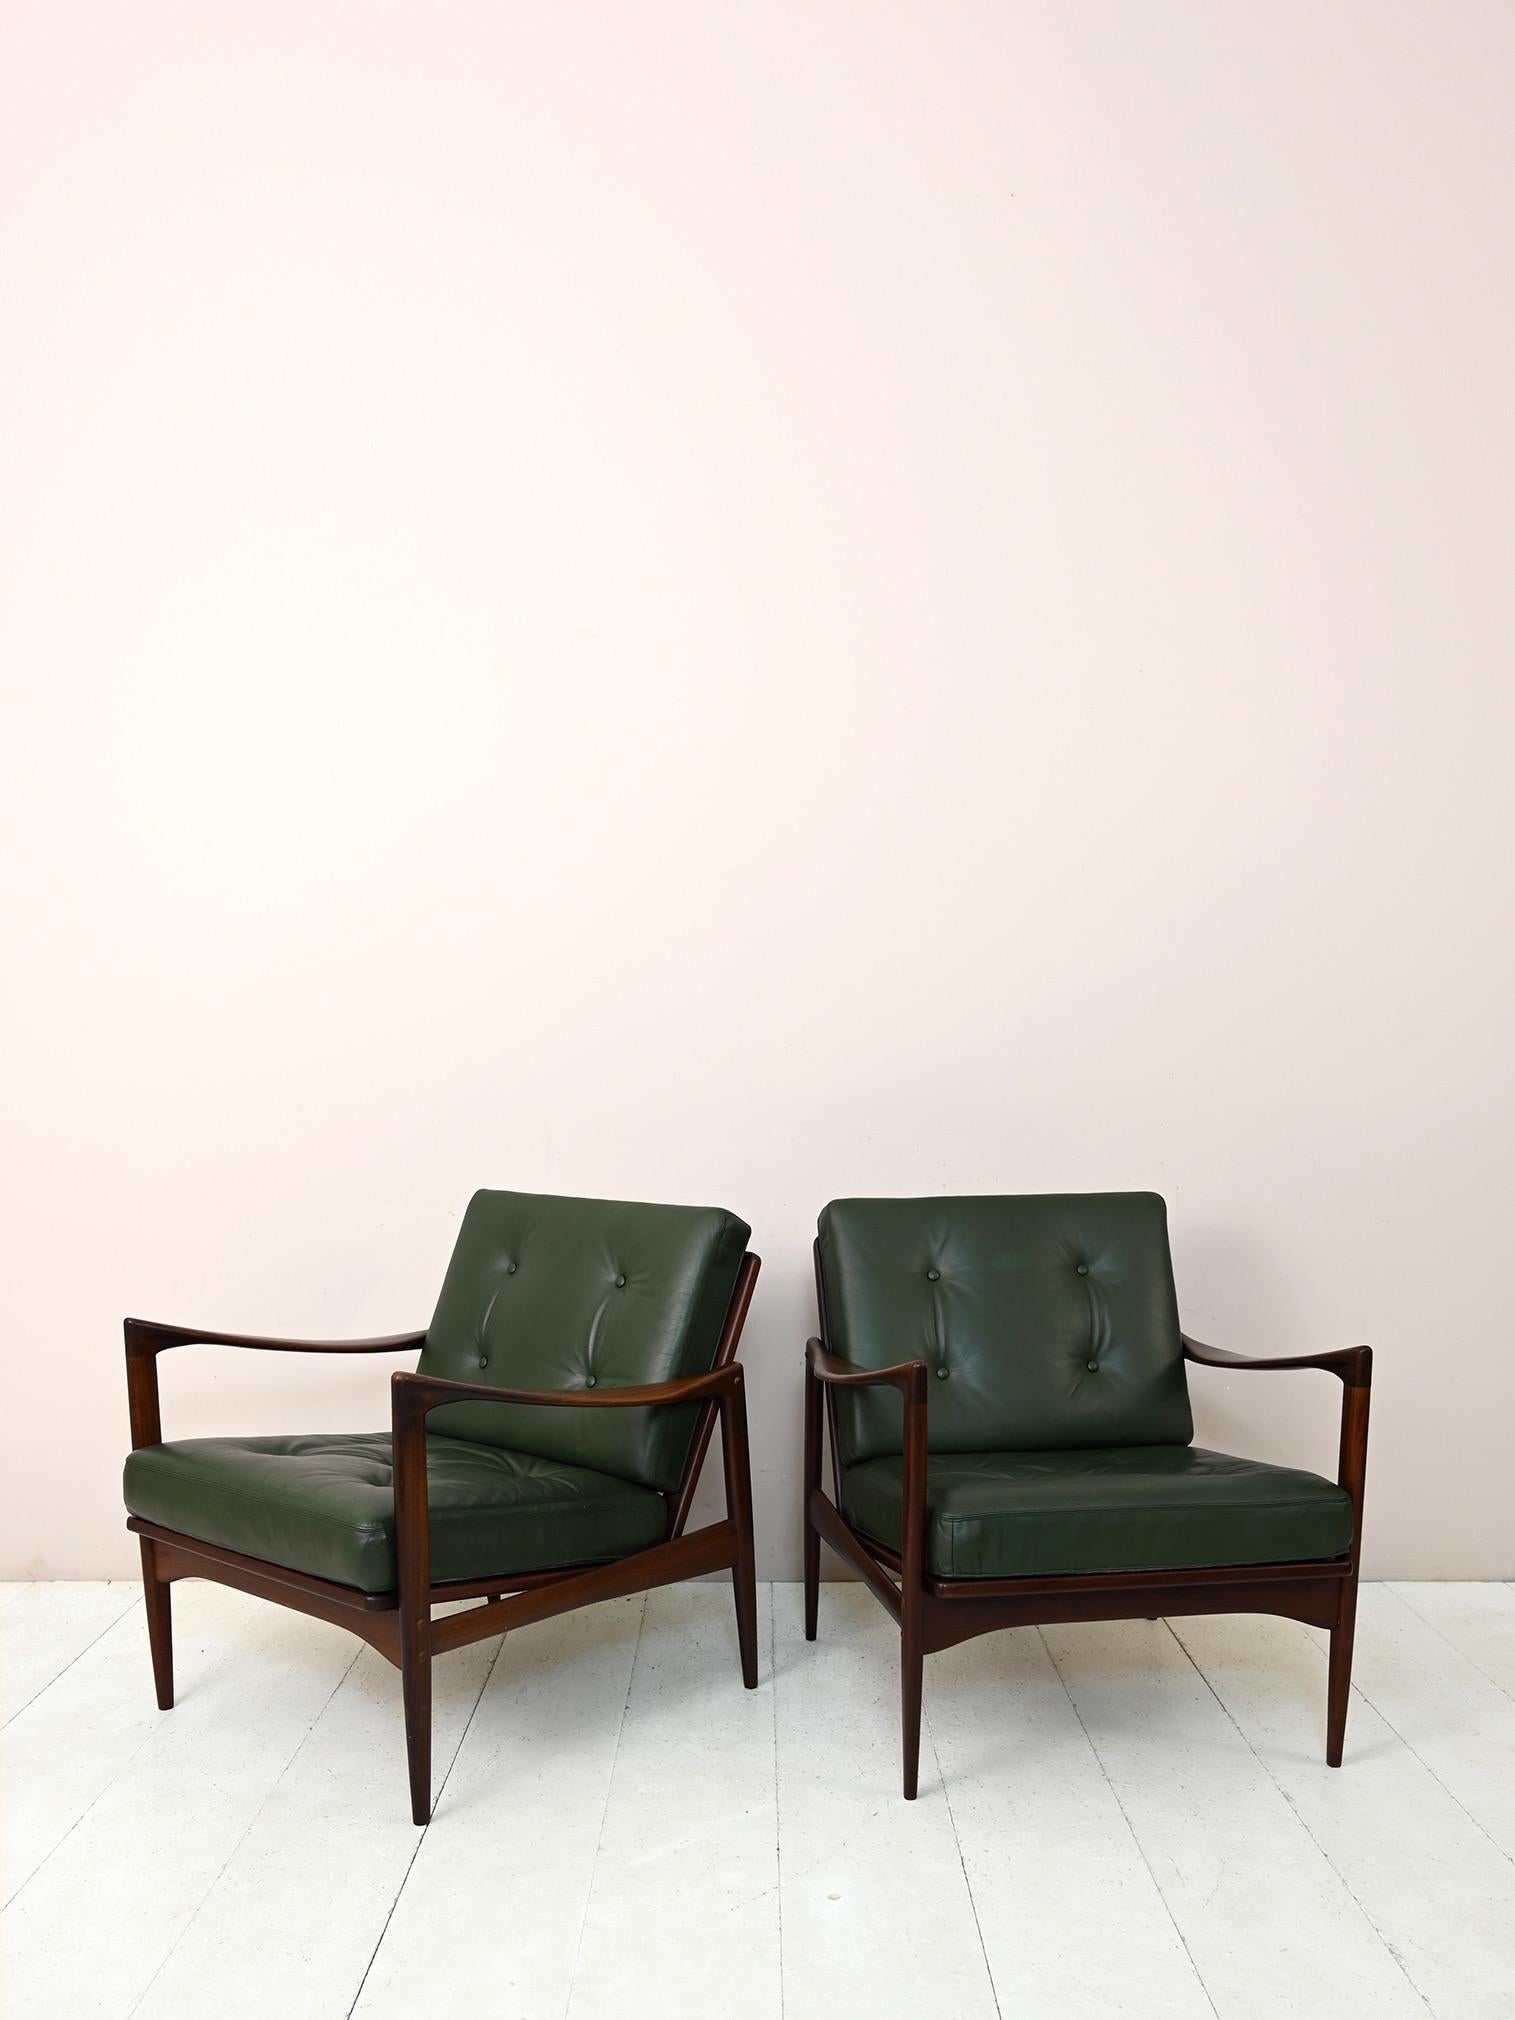 Pair of armchairs model Kandidaten for Ope.

Iconic Danish design object designed by Ib Kofod in the 1960s.
The solid teak wood frame has essential and refined lines. The greenish-colored cushions are vintage originals and in good